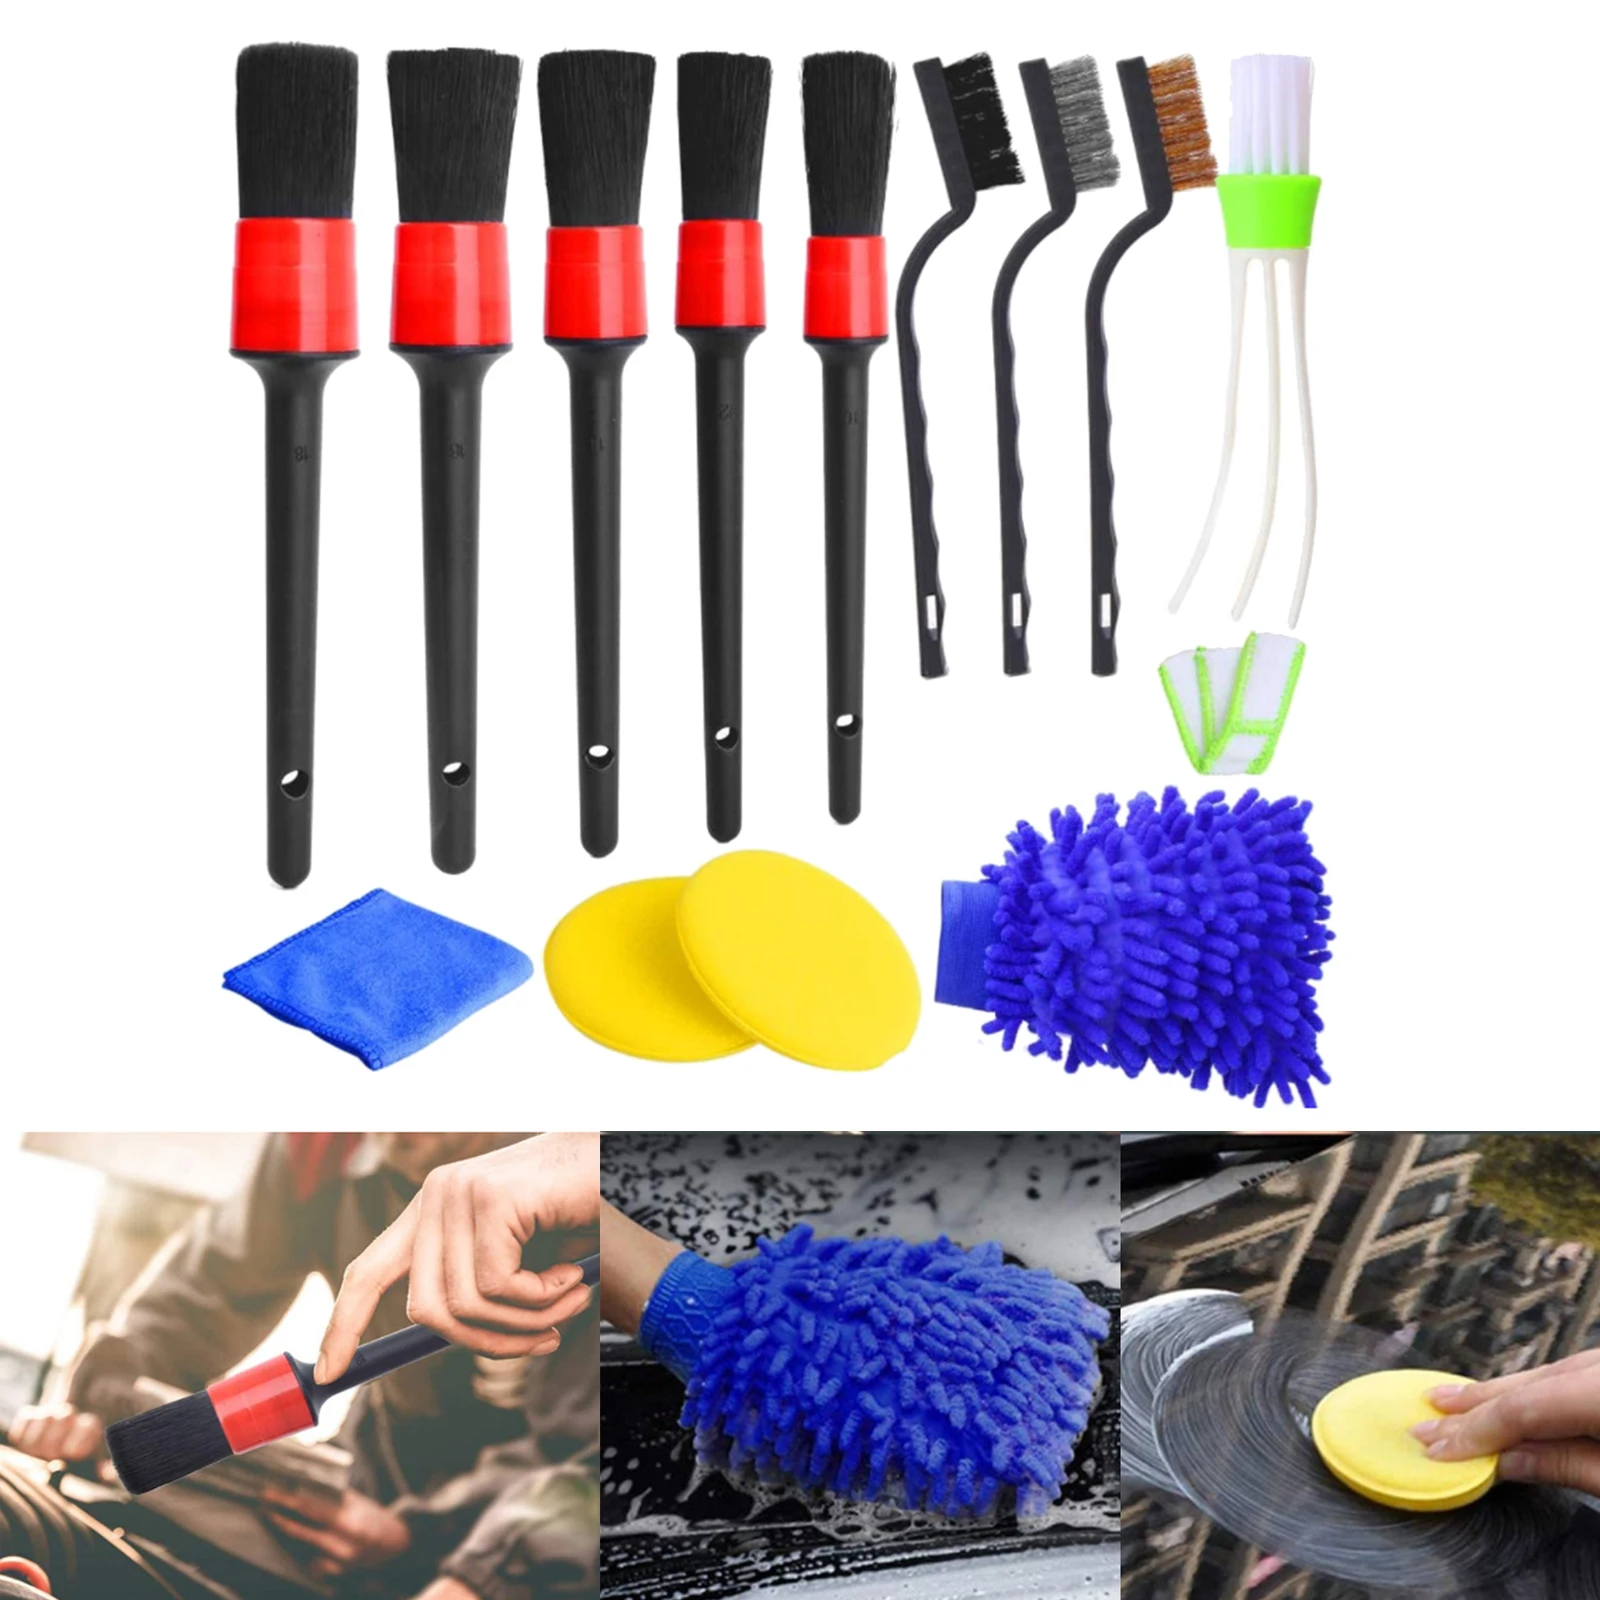 13x Car Detailing Brush Set Dashboard Air Outlet Clean Brush Tools Dashboard Interior Exterior Leather Air Vents Cleaning